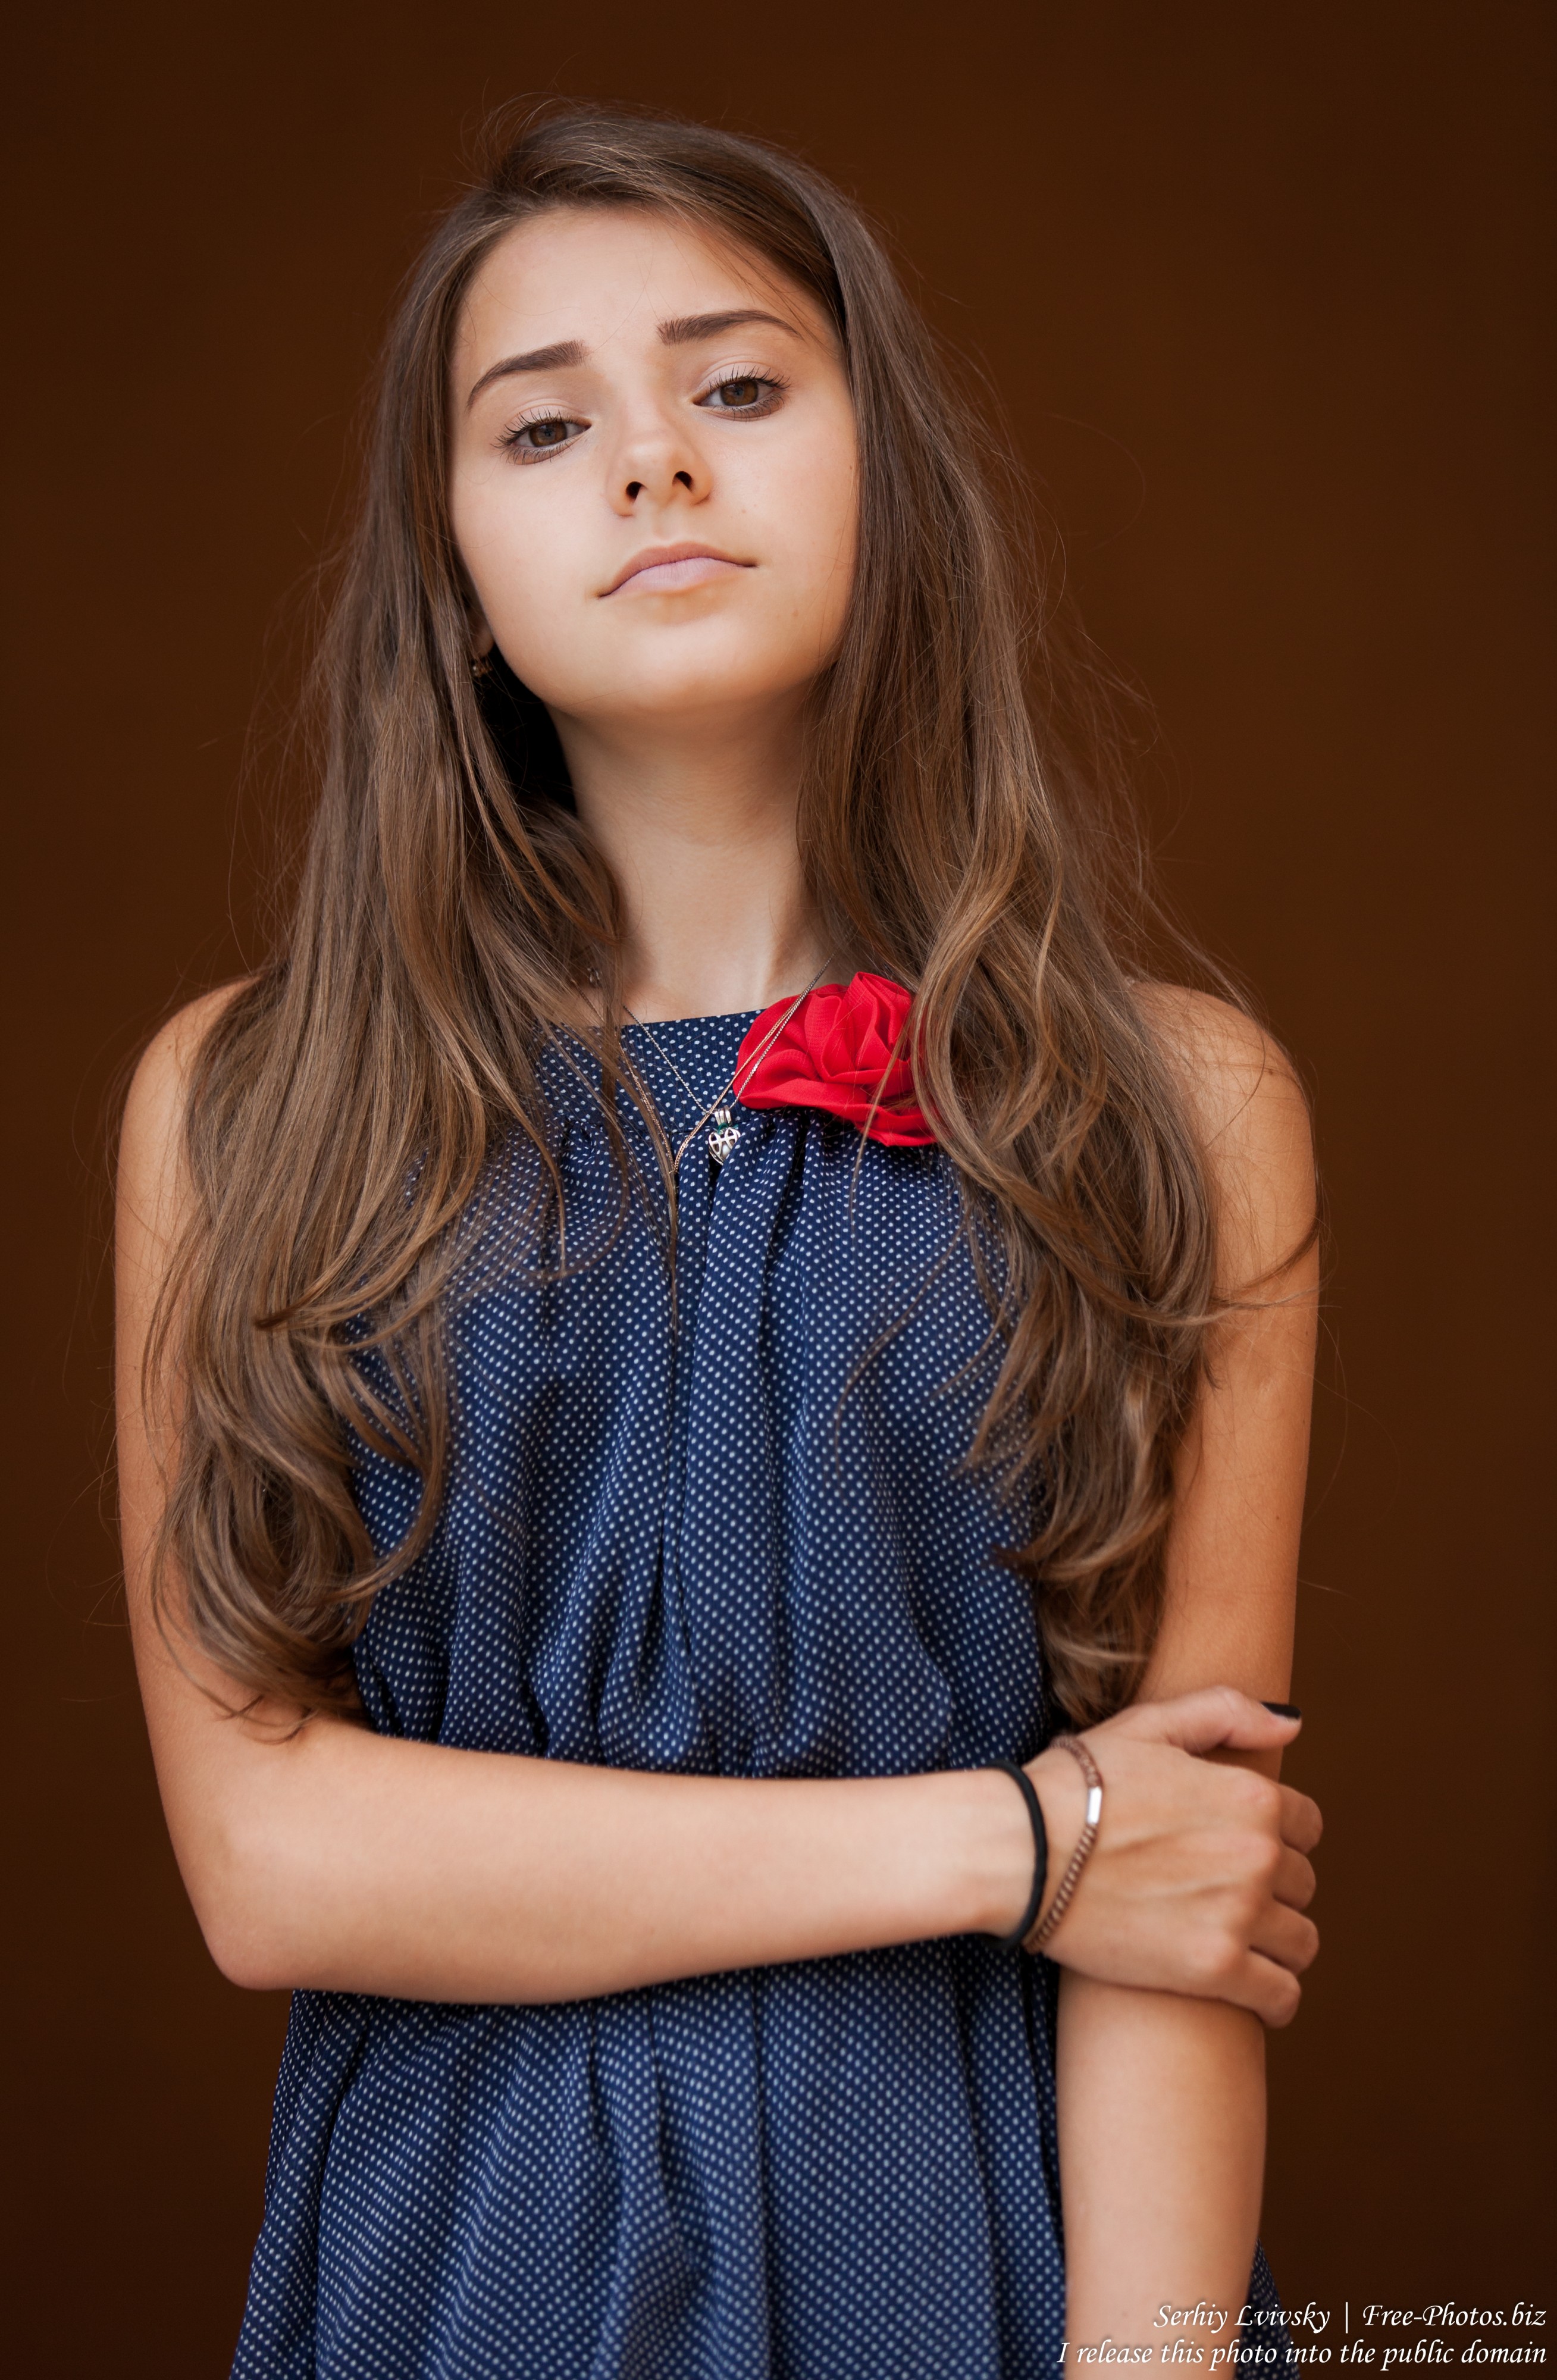 a 14-year-old brunette girl photographed in July 2015, picture 13